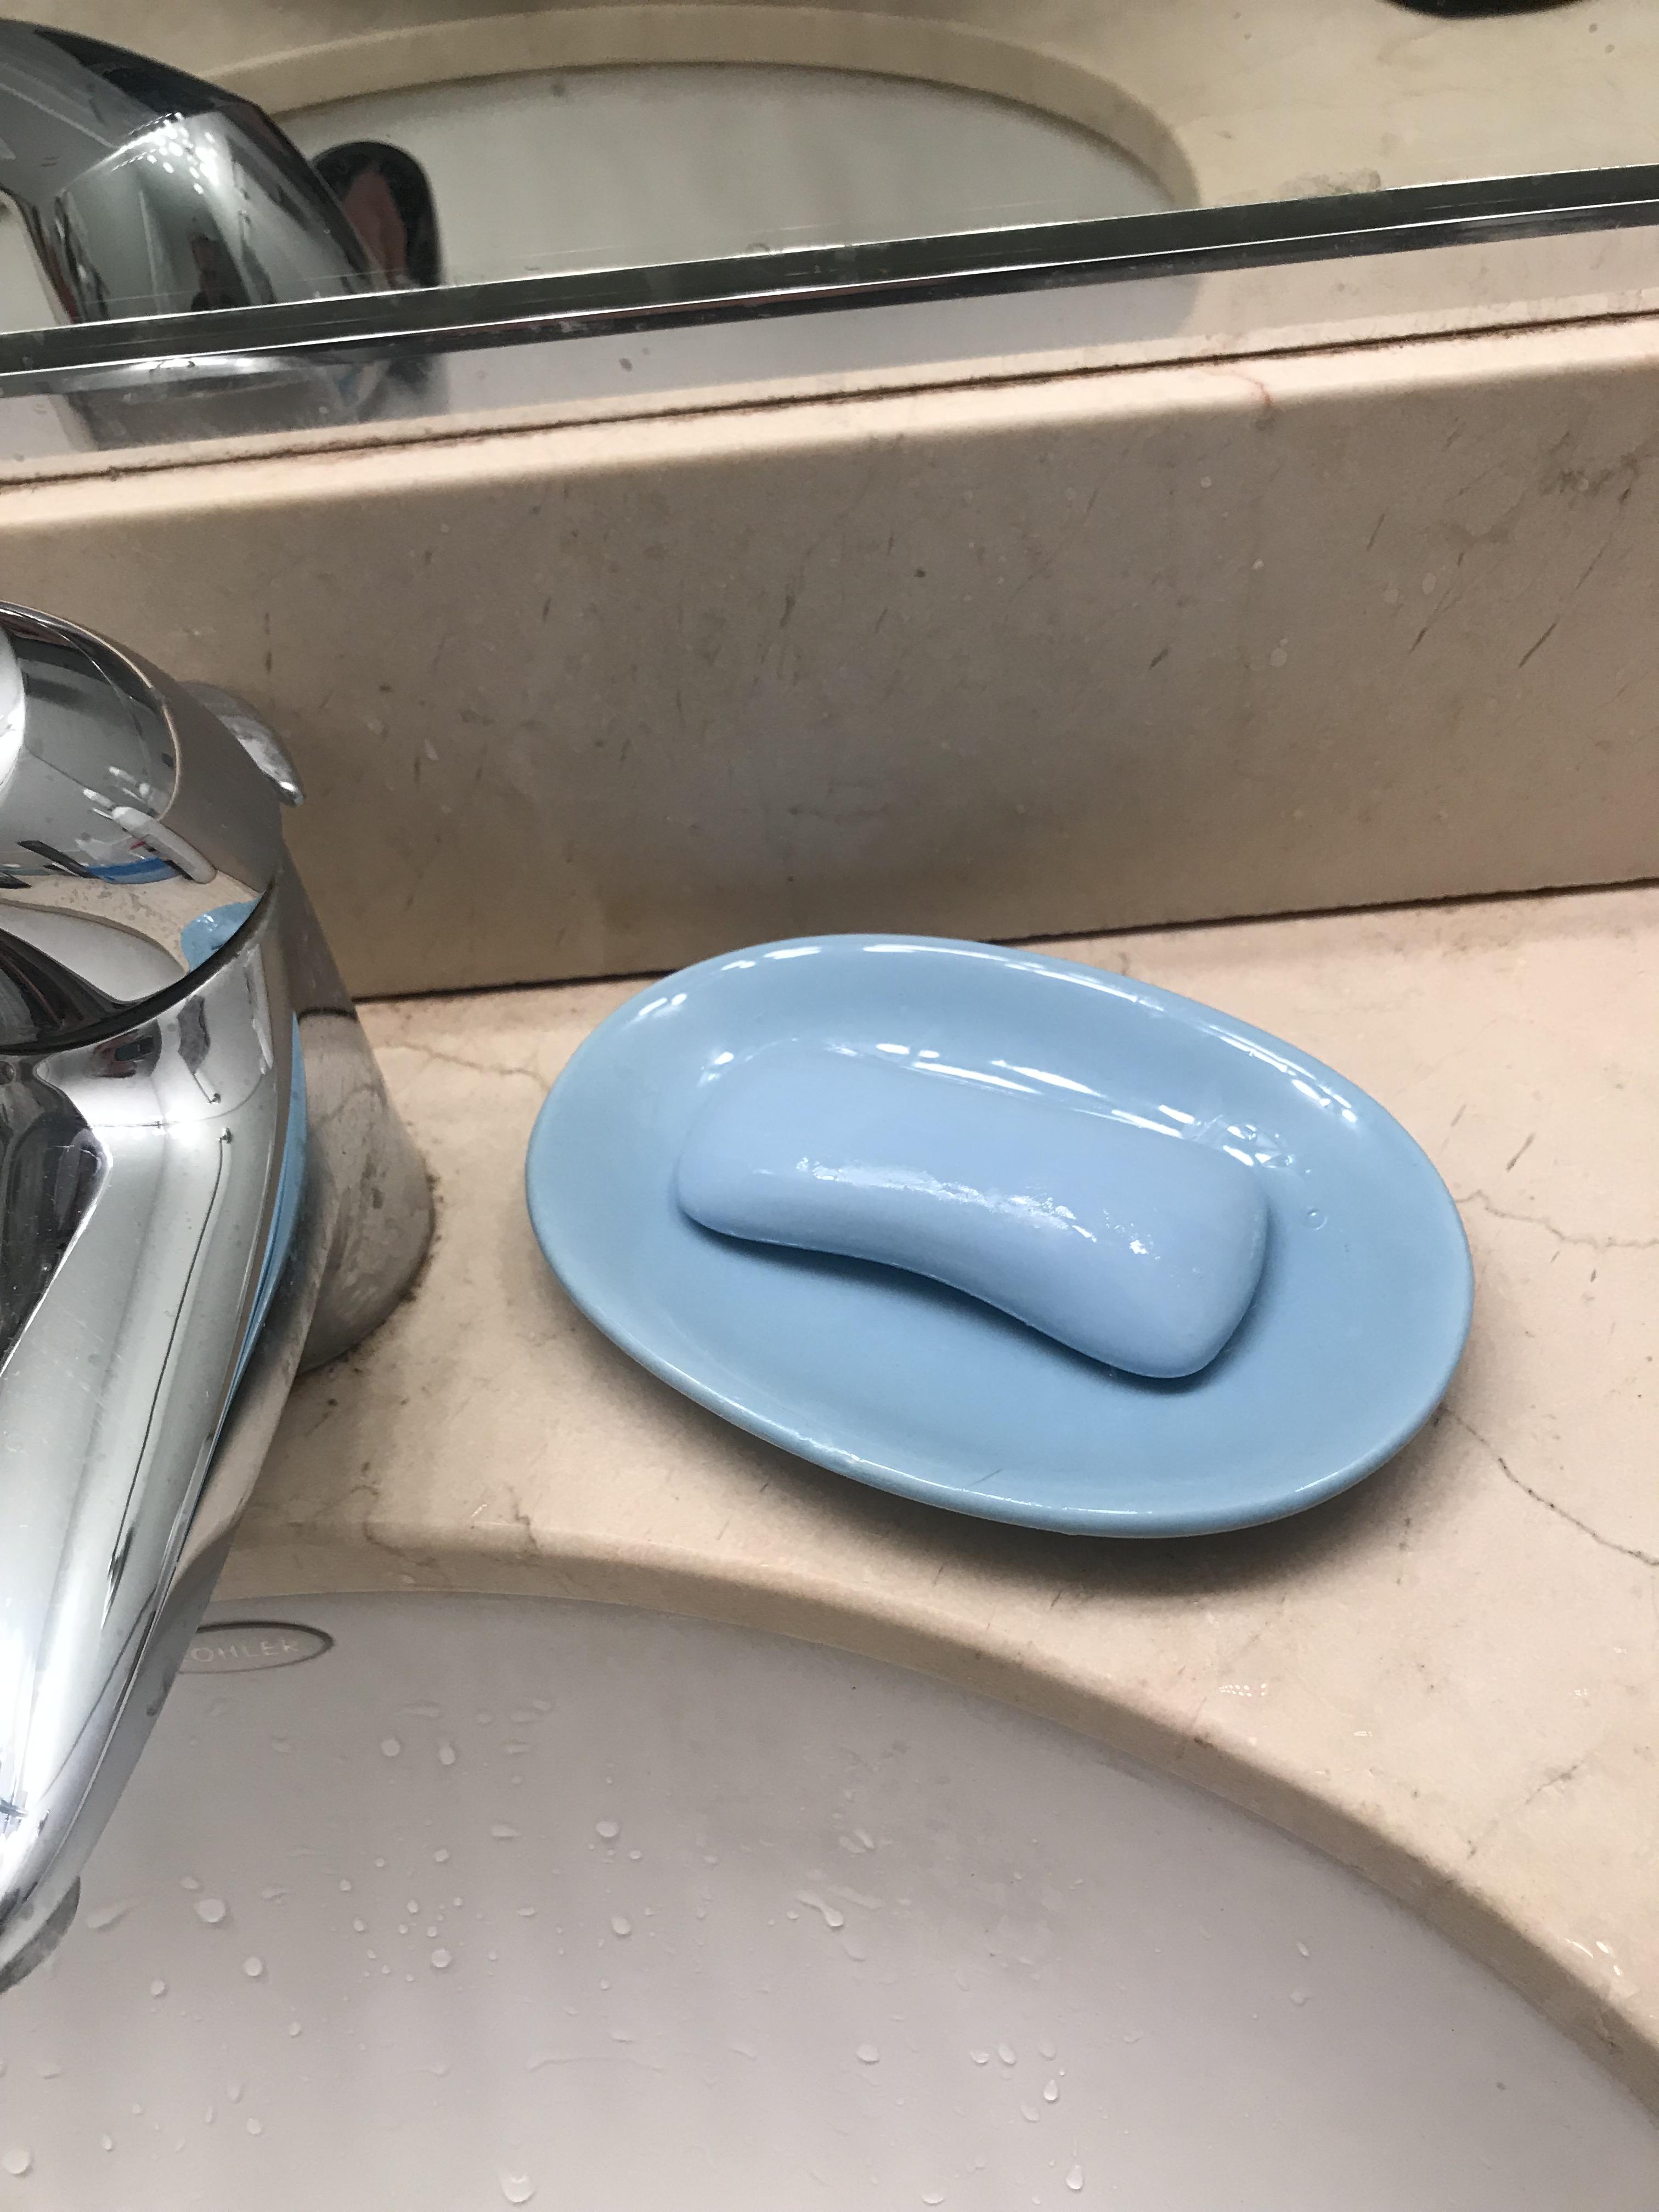 This bar of soap is the same color as my soap dish